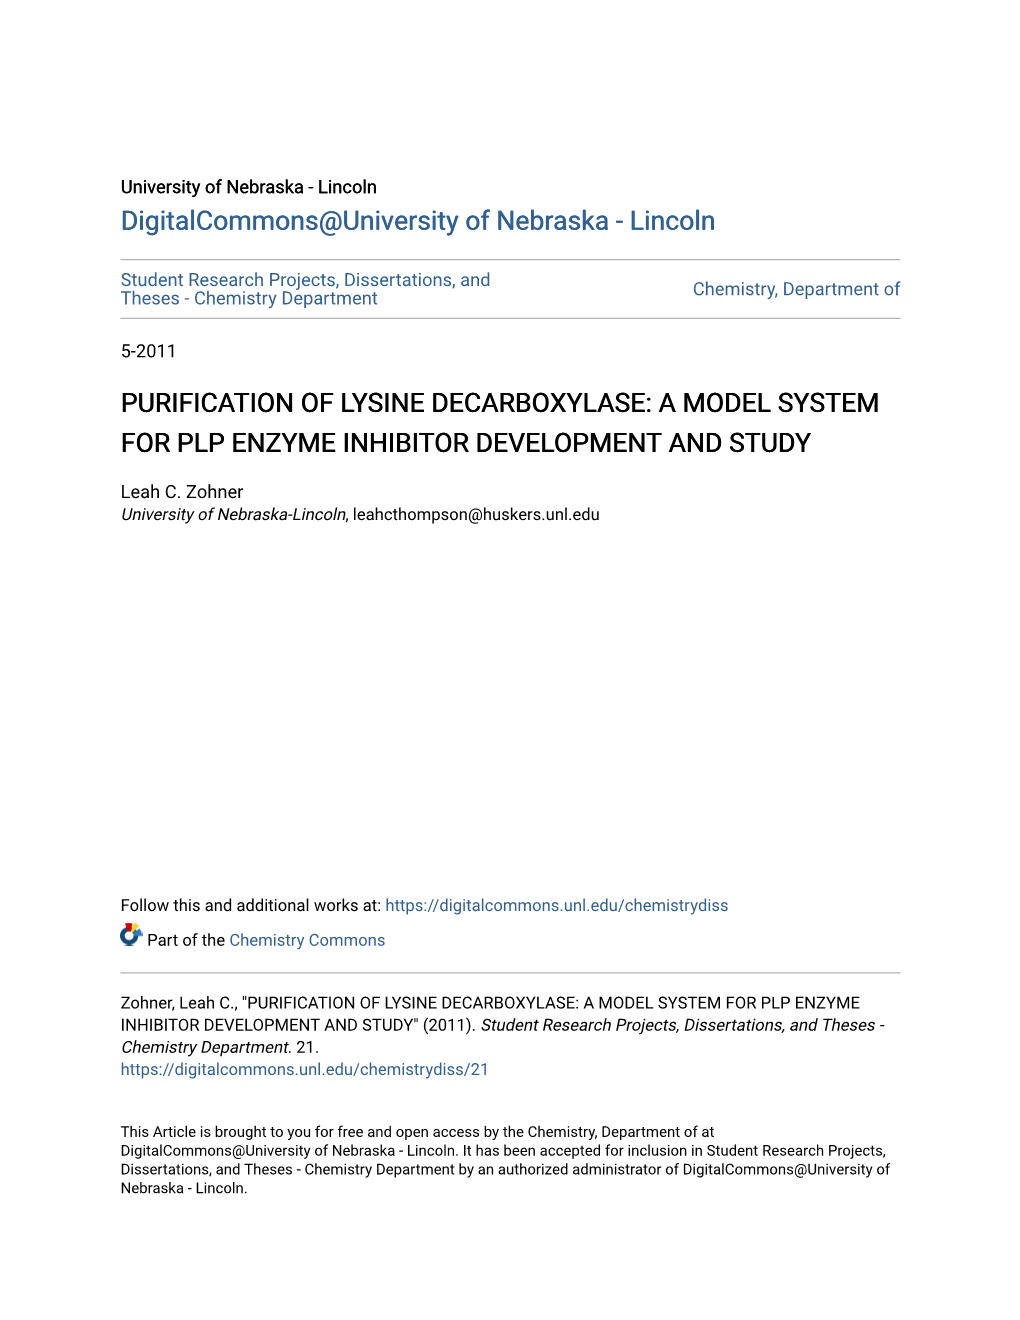 Purification of Lysine Decarboxylase: a Model System for Plp Enzyme Inhibitor Development and Study